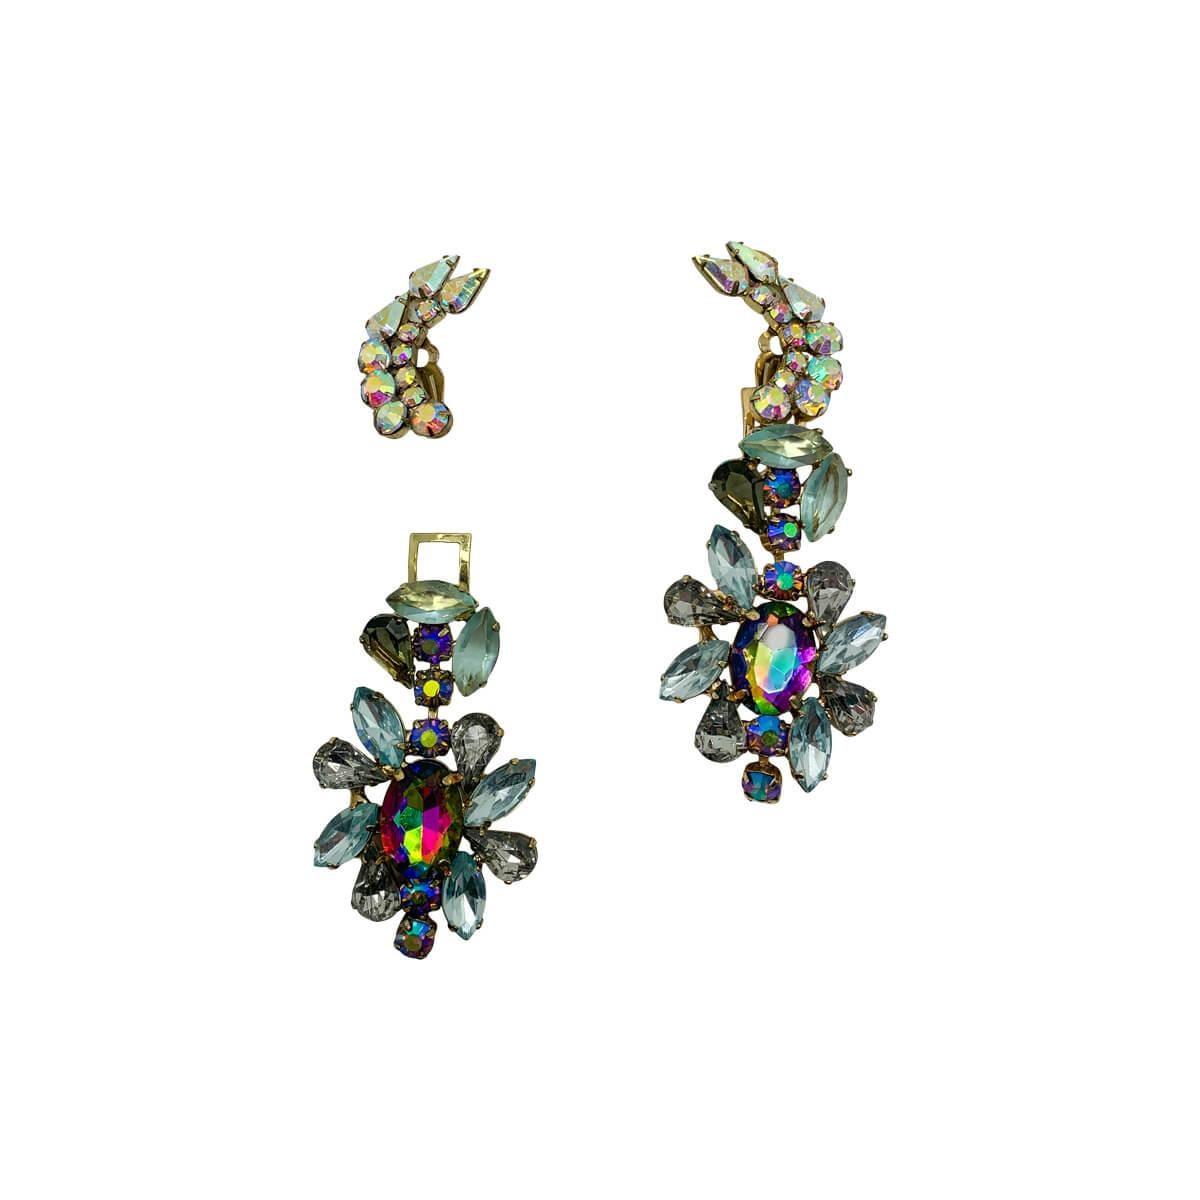 Uber cool and glamorous vintage kaleidoscope earrings. Featuring a day to night design so you can wow with a clip or a statement look. 
Vintage Condition: Very good without damage or noteworthy wear. 
Materials: Gold tone metal, glass stones
Signed: